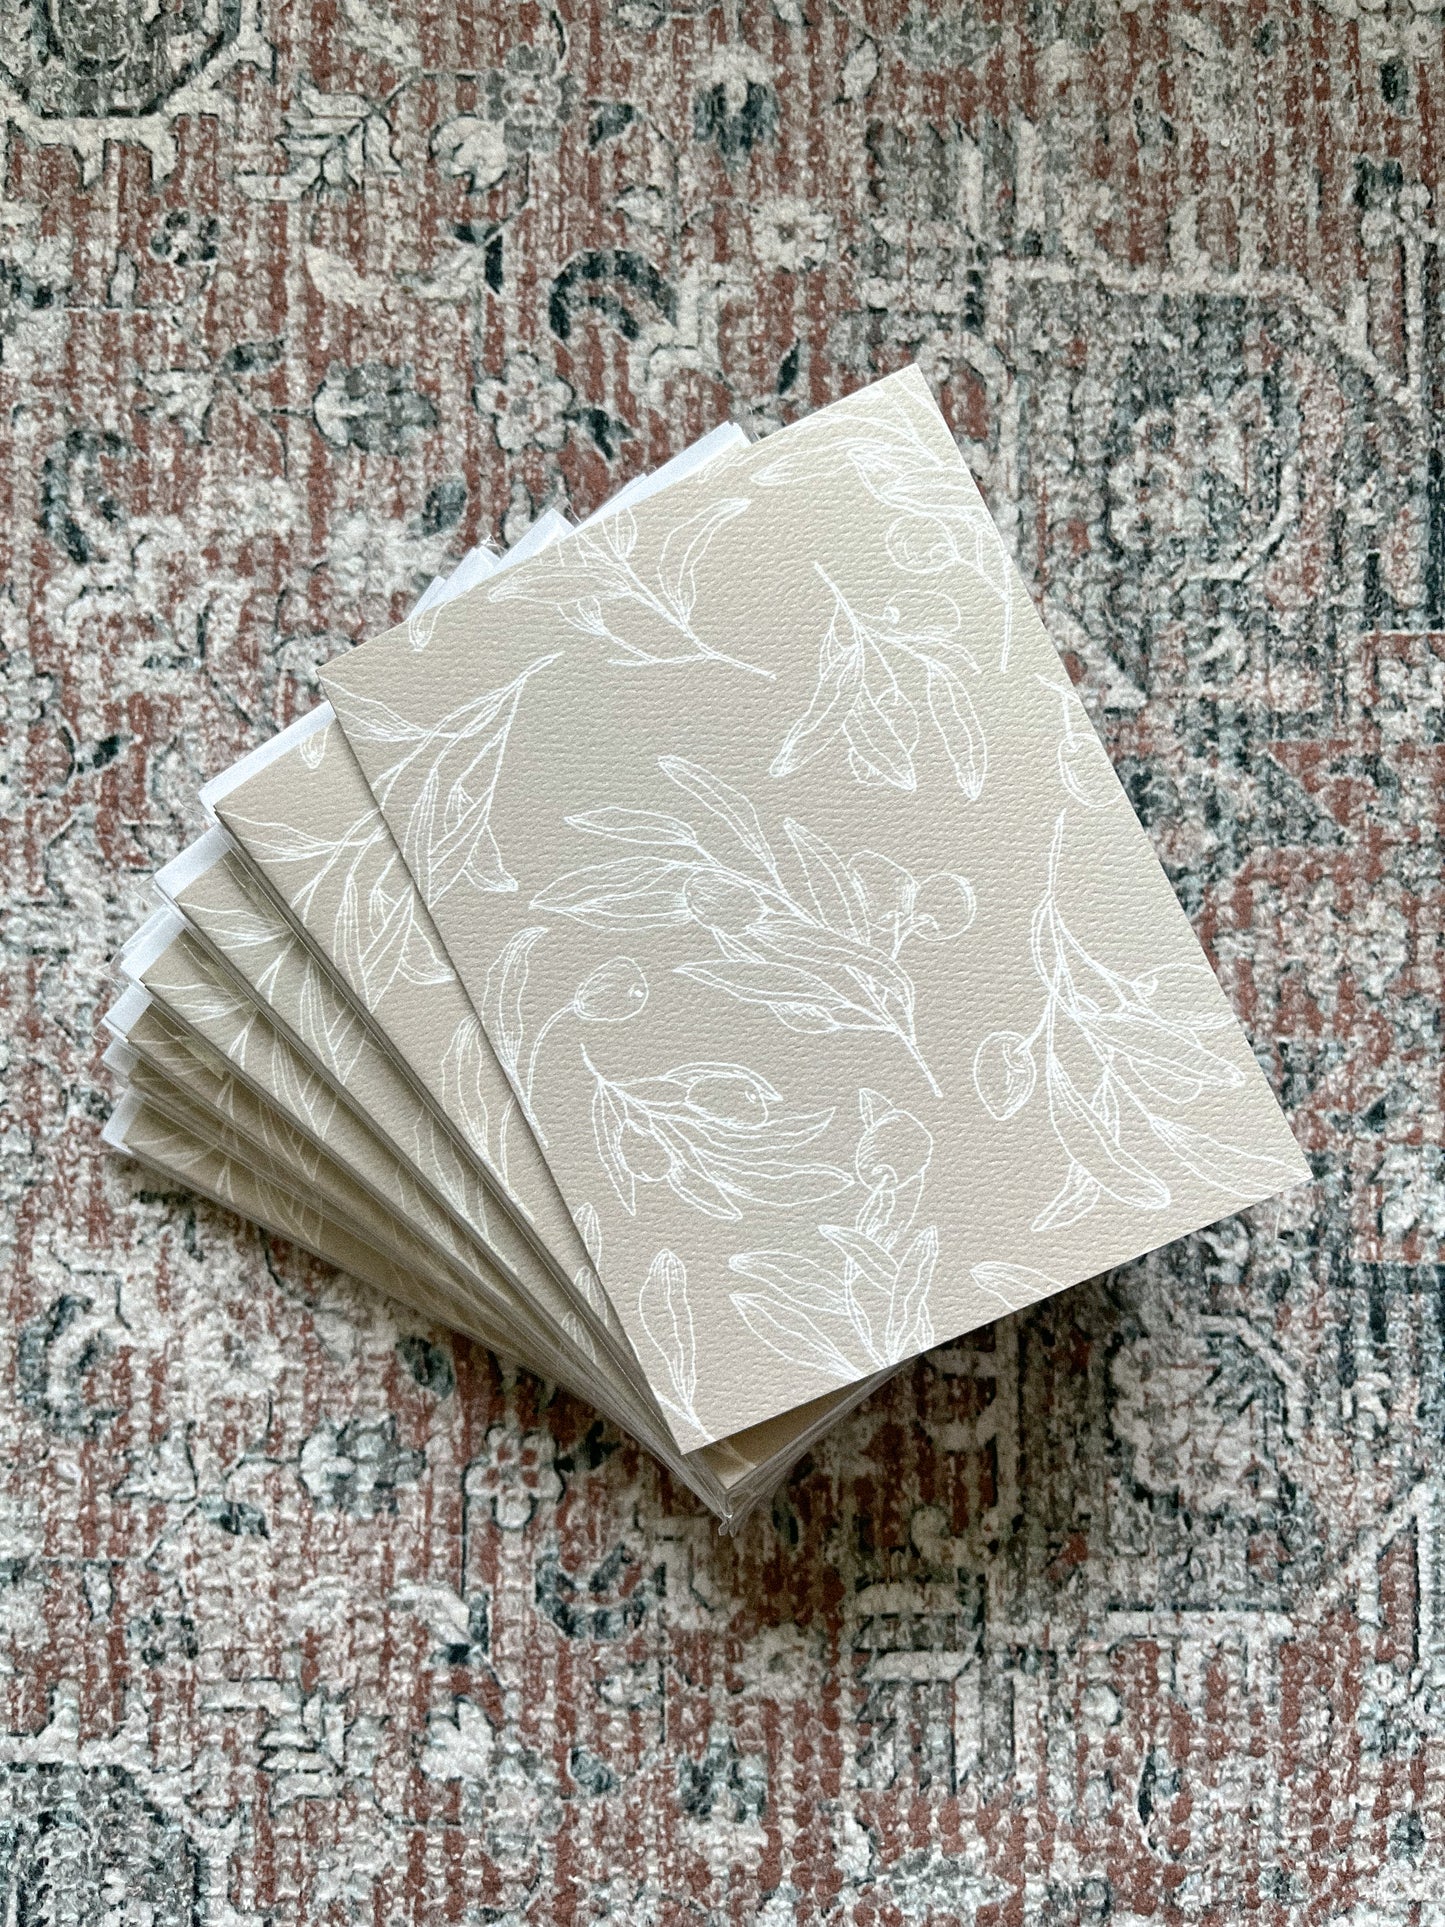 Hand-Sketched Notecards